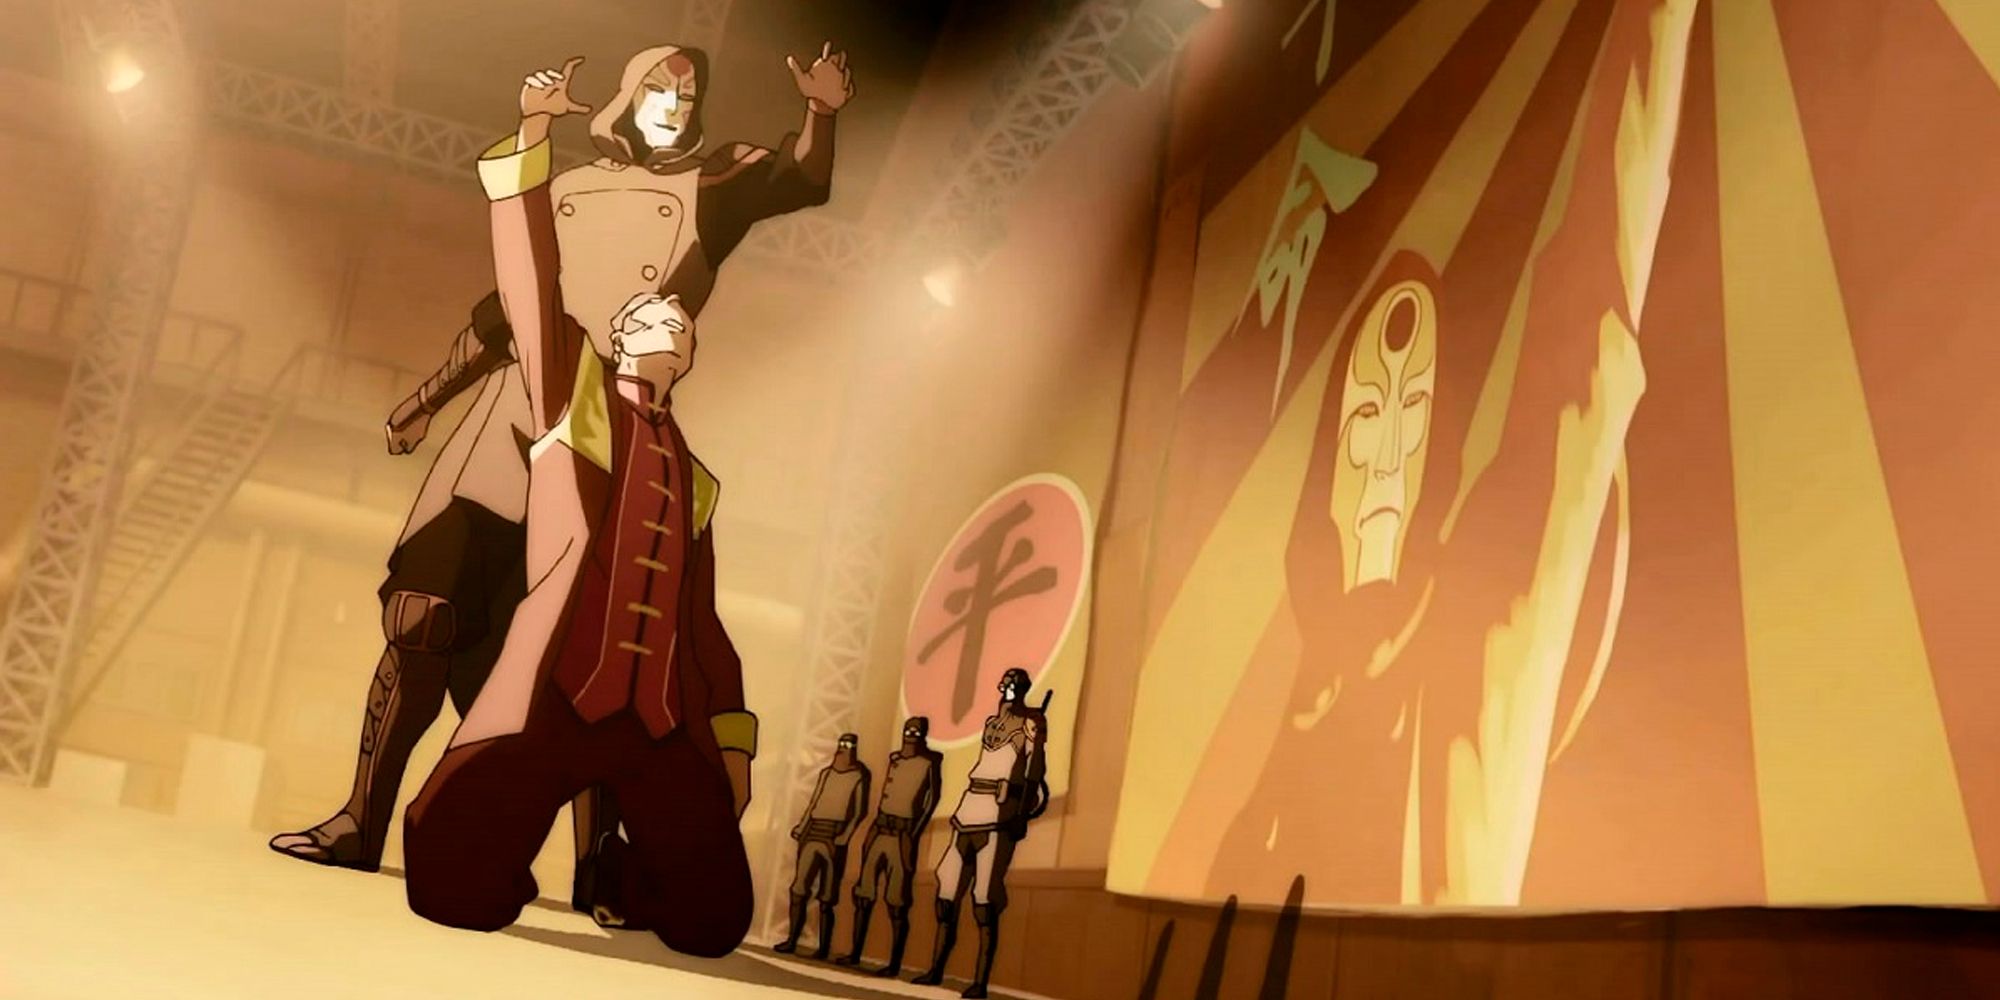 Amon demonstrated his skills on rallies to gain followers in The Legend of Korra season 1